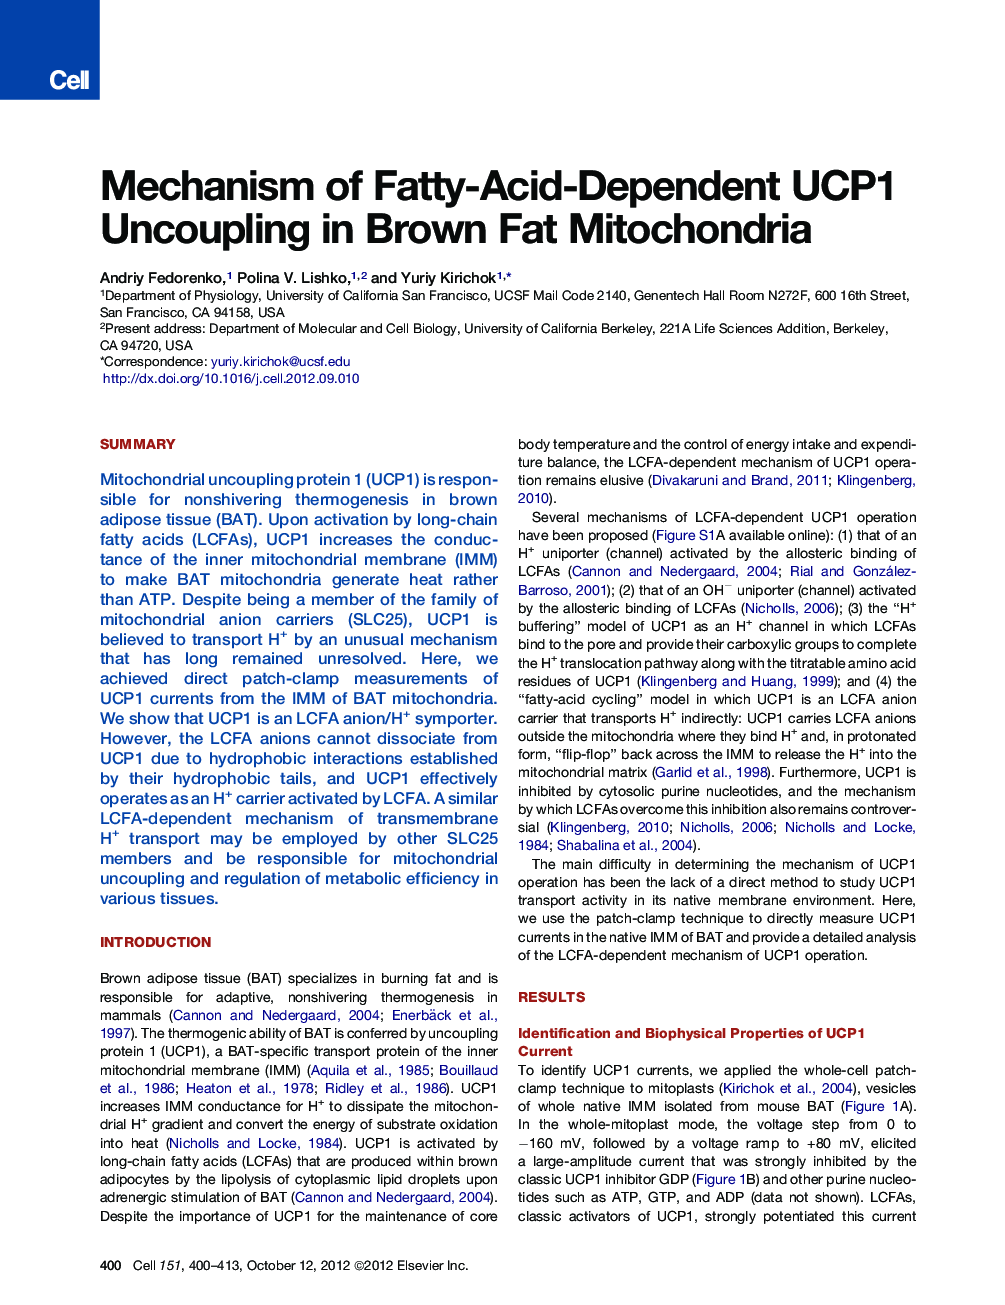 Mechanism of Fatty-Acid-Dependent UCP1 Uncoupling in Brown Fat Mitochondria